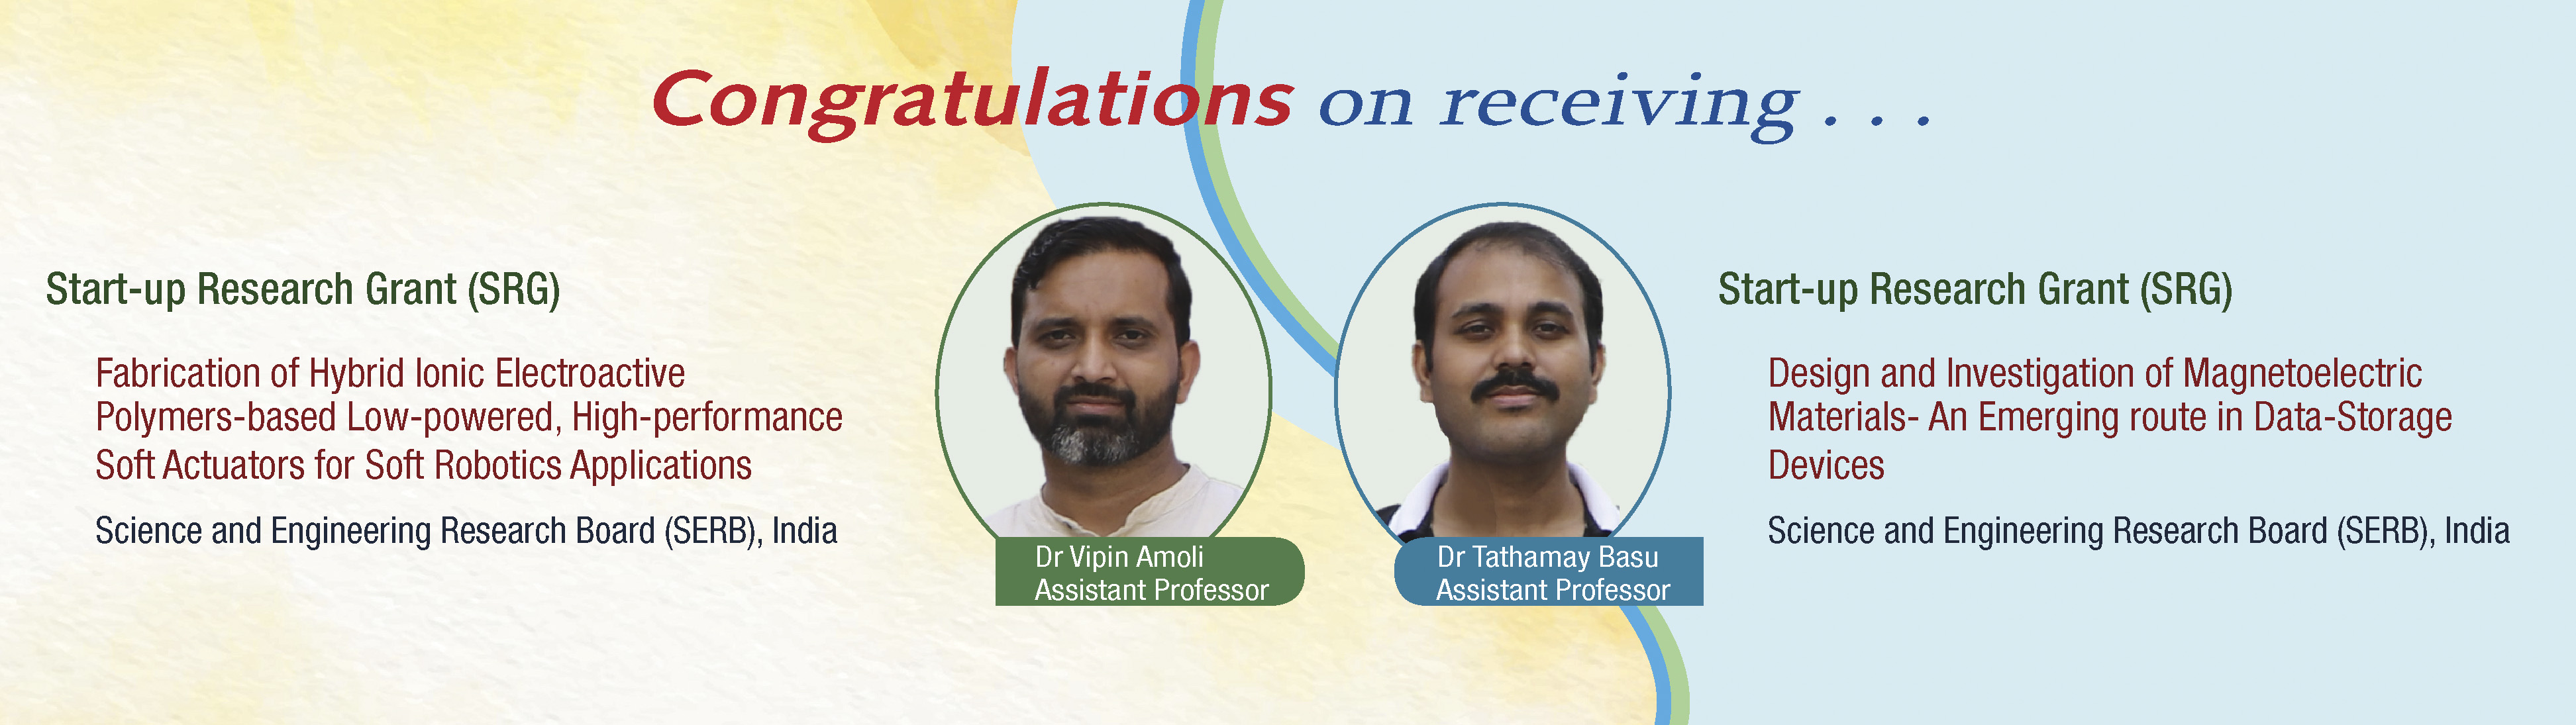 Congratulations!! Outstanding achievements of Dr Vipin and Dr Tathamay in advancing deep technology based research is commendable